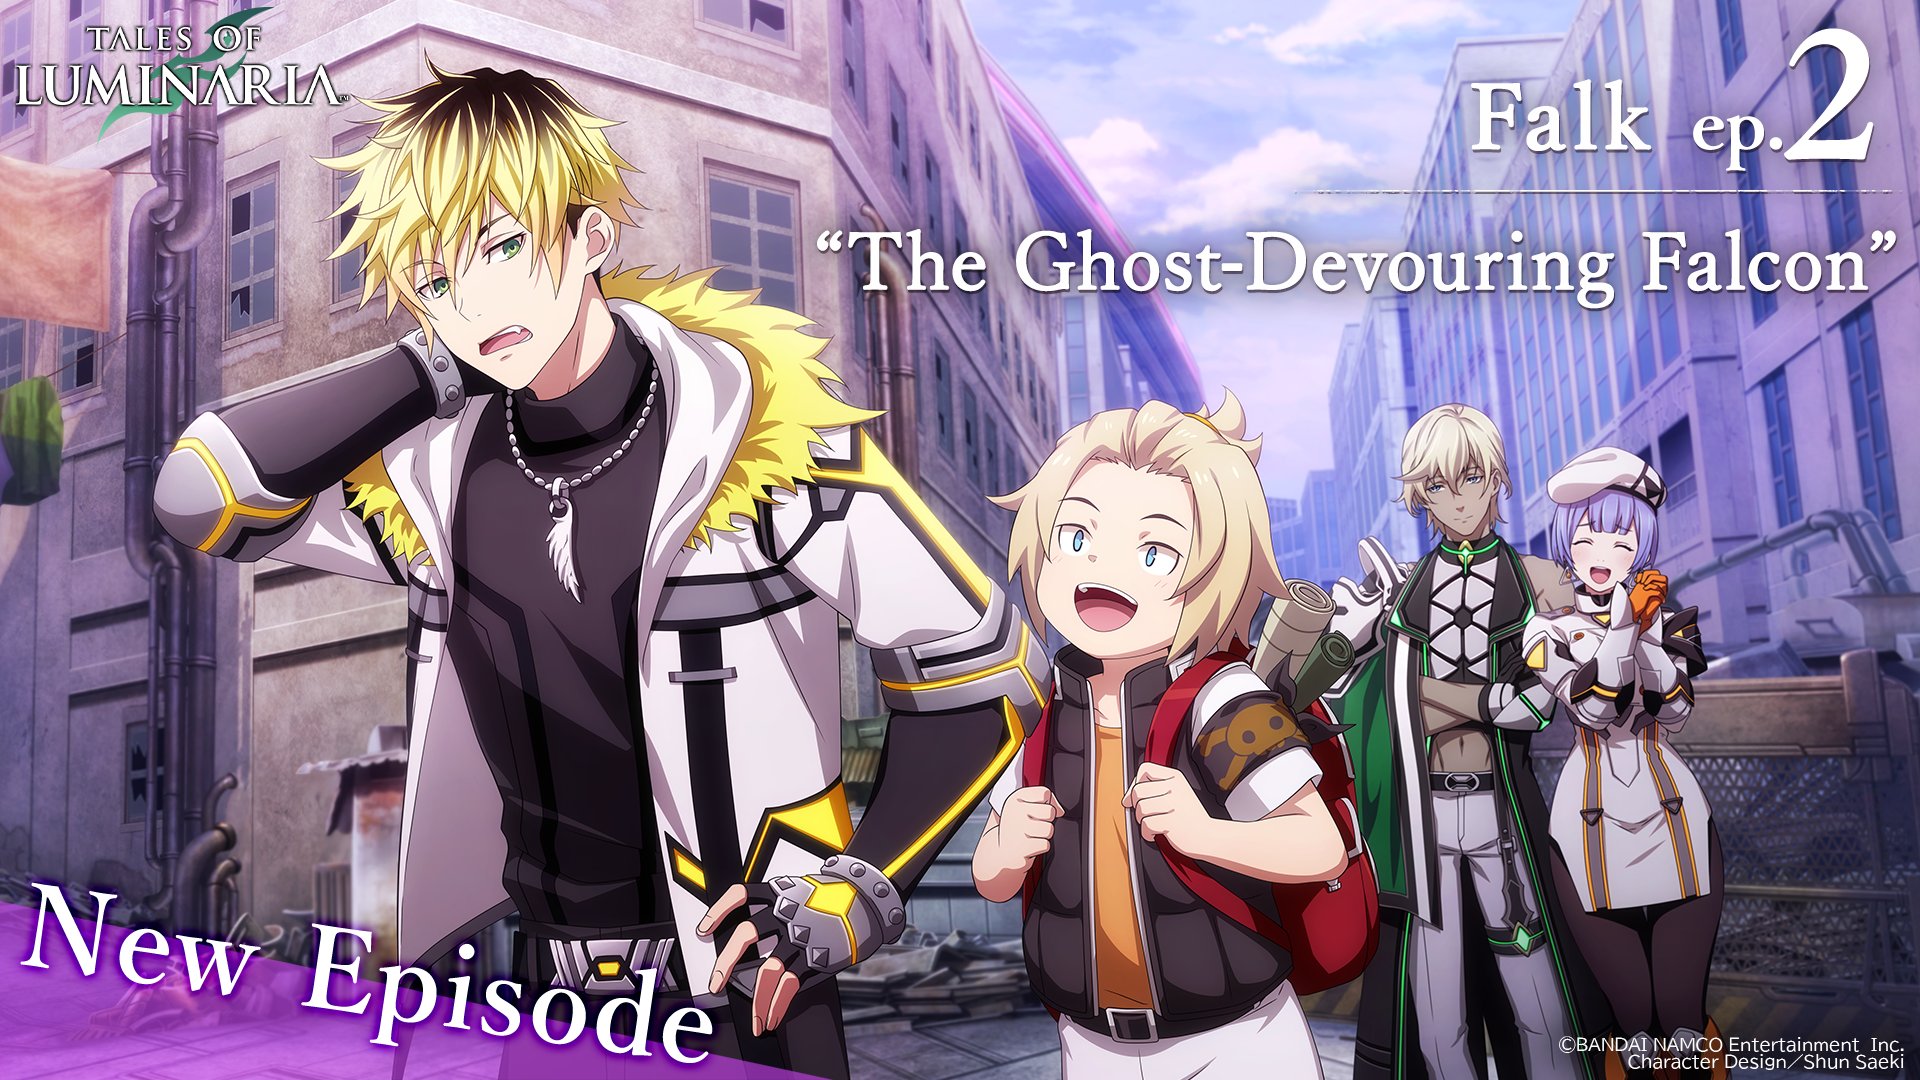 New Tales of Luminaria Update Tomorrow; Falk Episode 2 “The Ghost-Devouring Falcon”